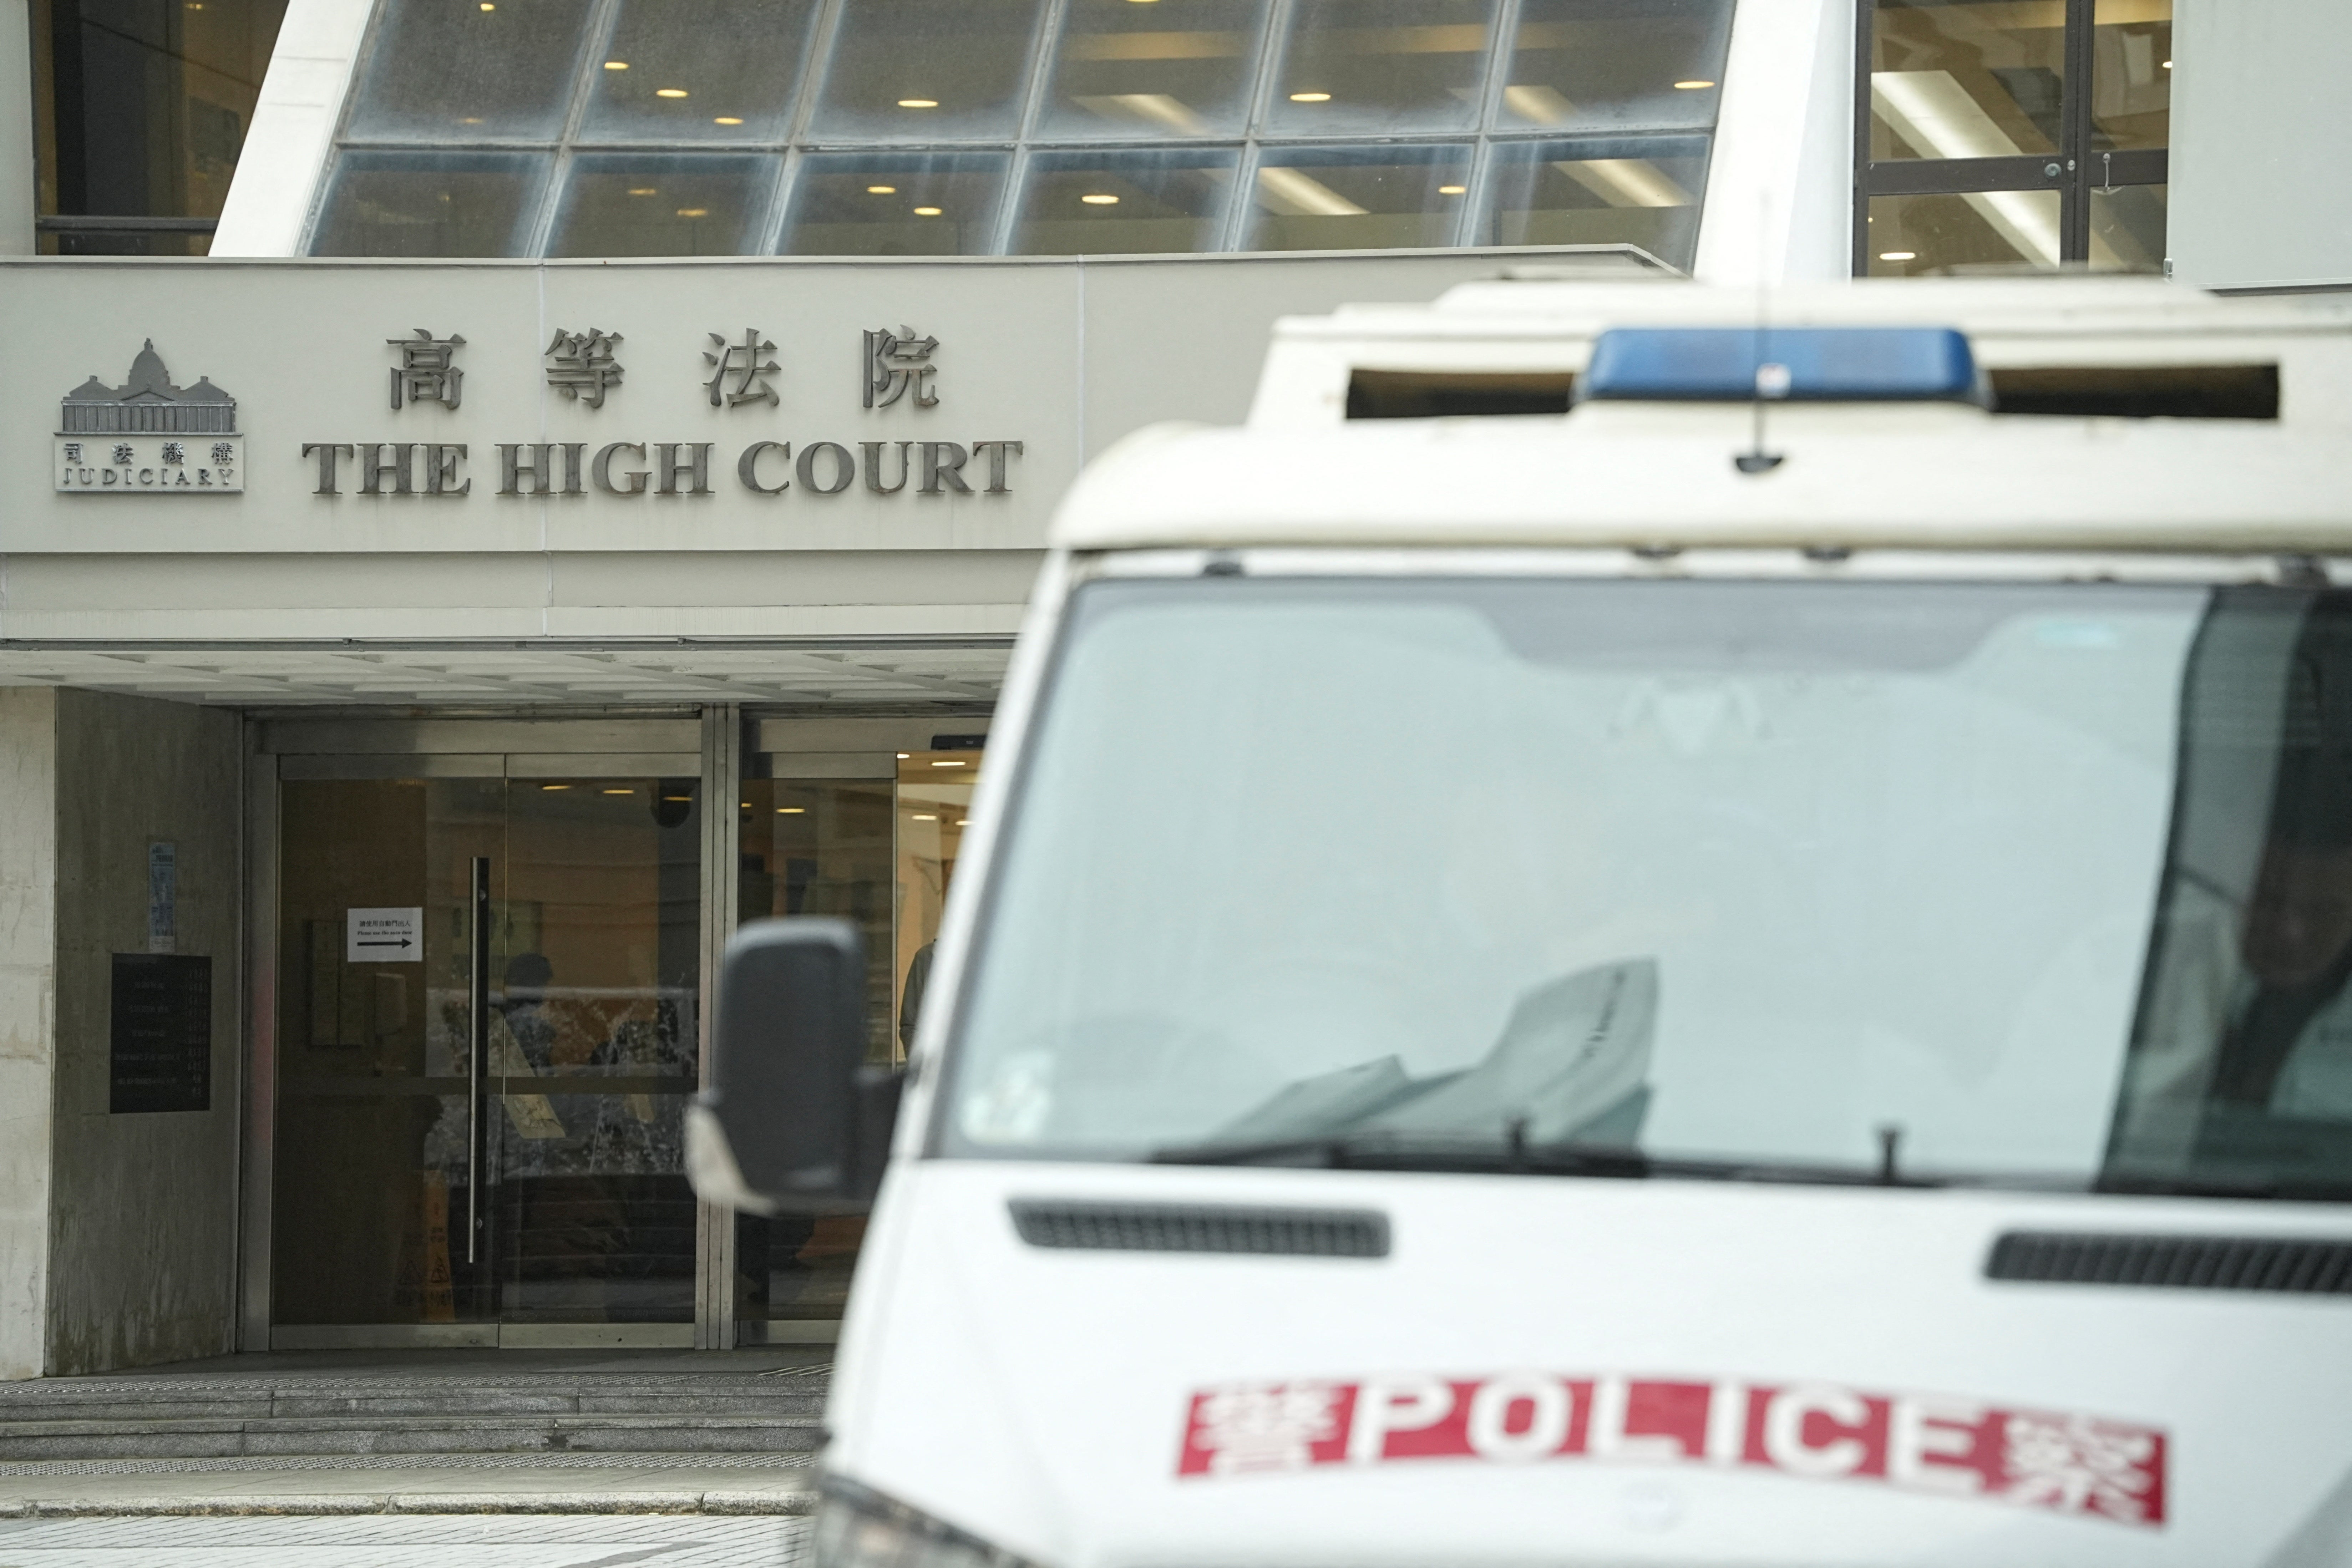 Representative: A police vehicle is pictured outside the High Court